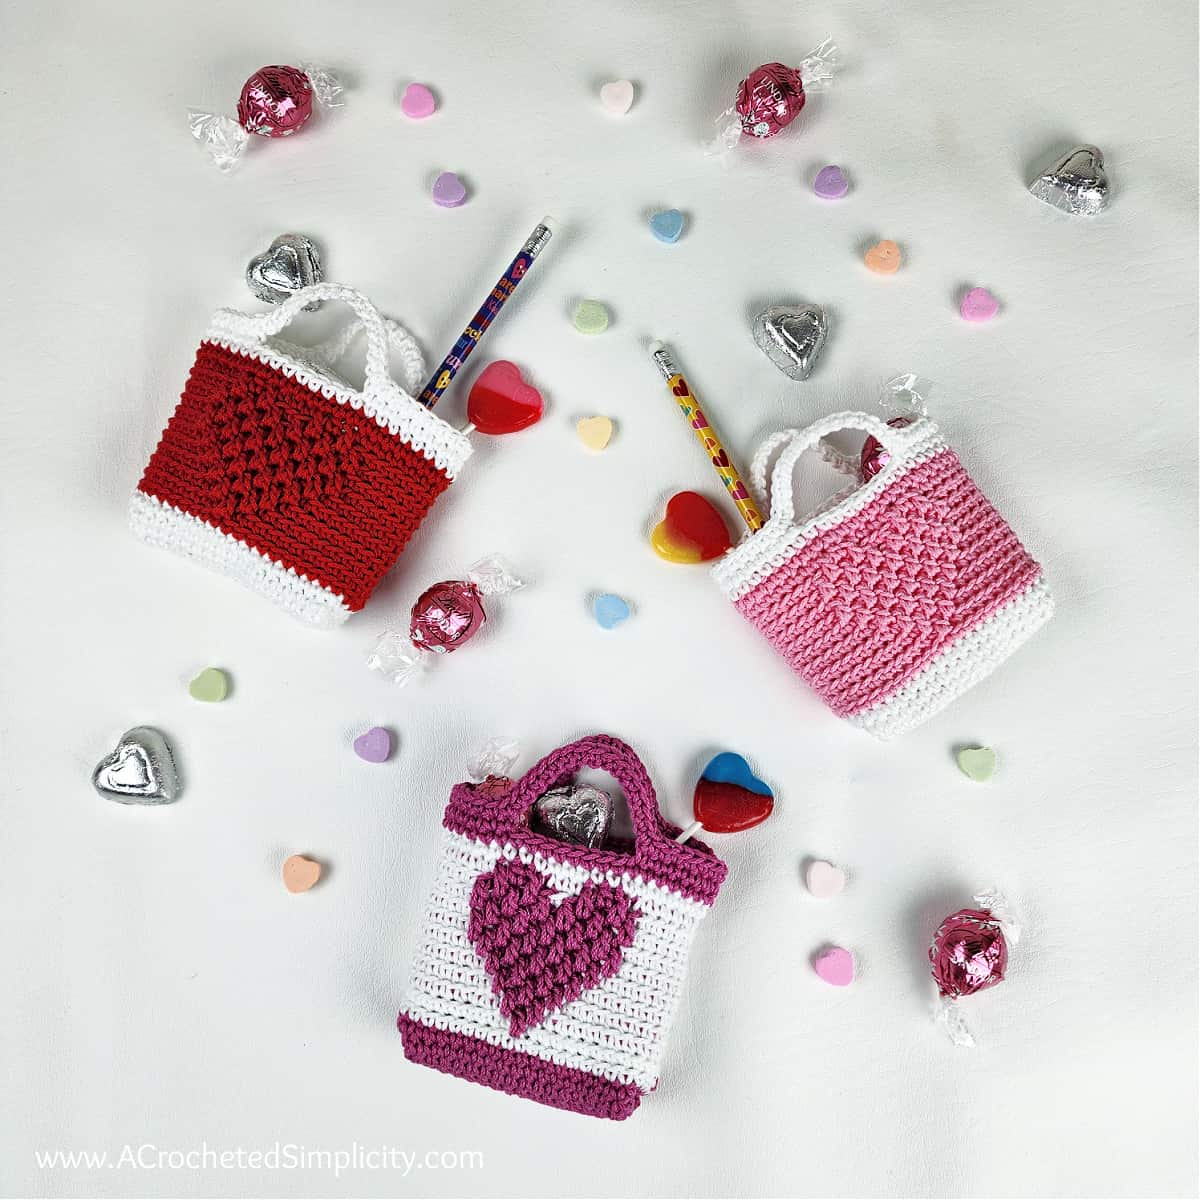 Three small crochet valentine treat bags in red, white and pinks with small candies.